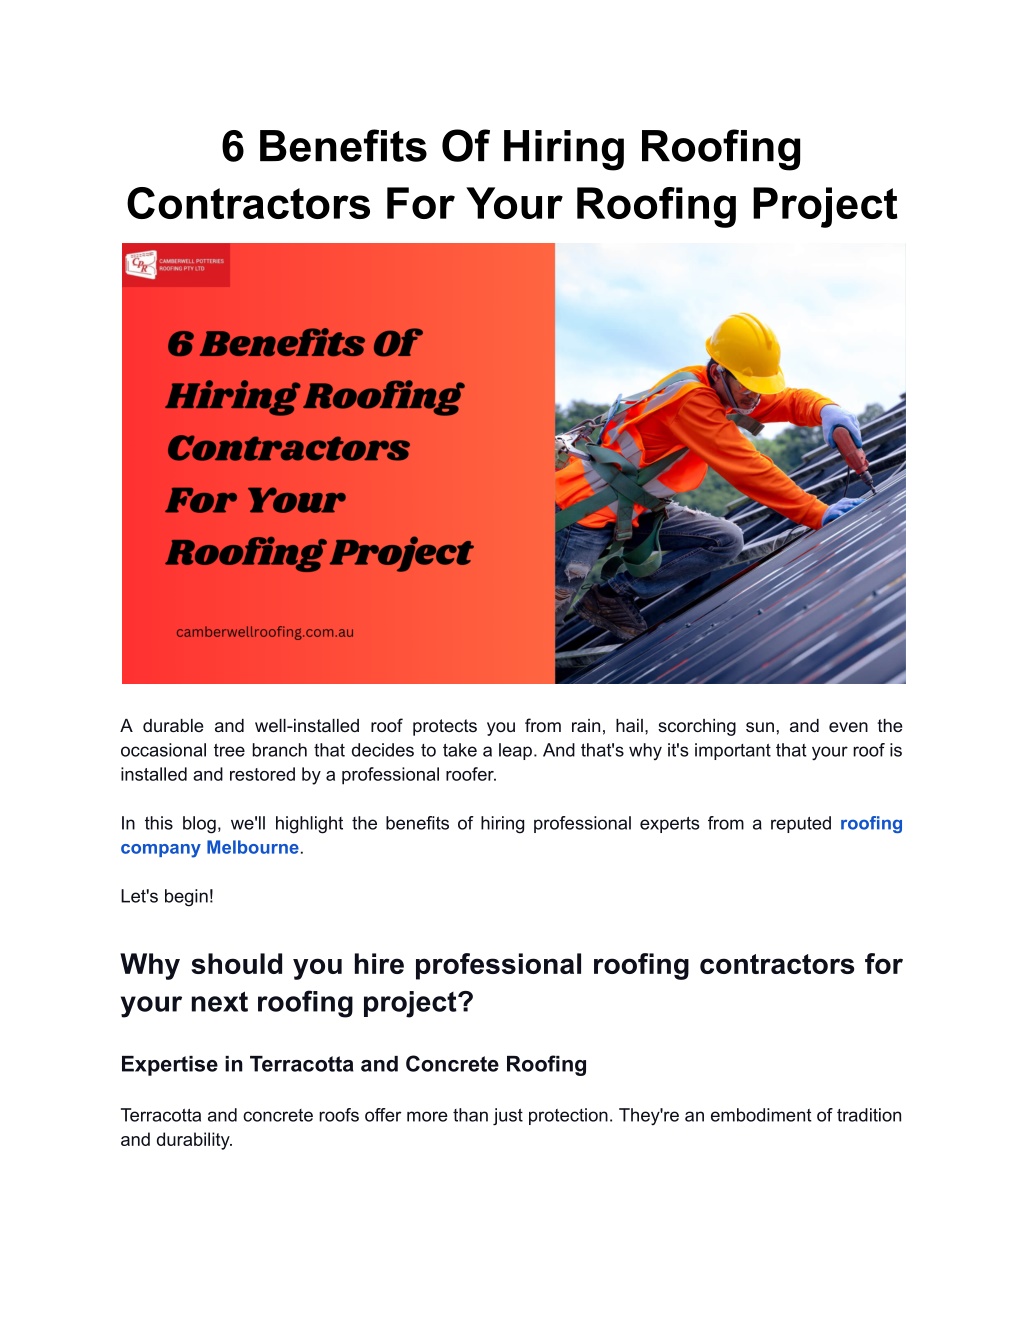 C&d Suffolk County Roofers